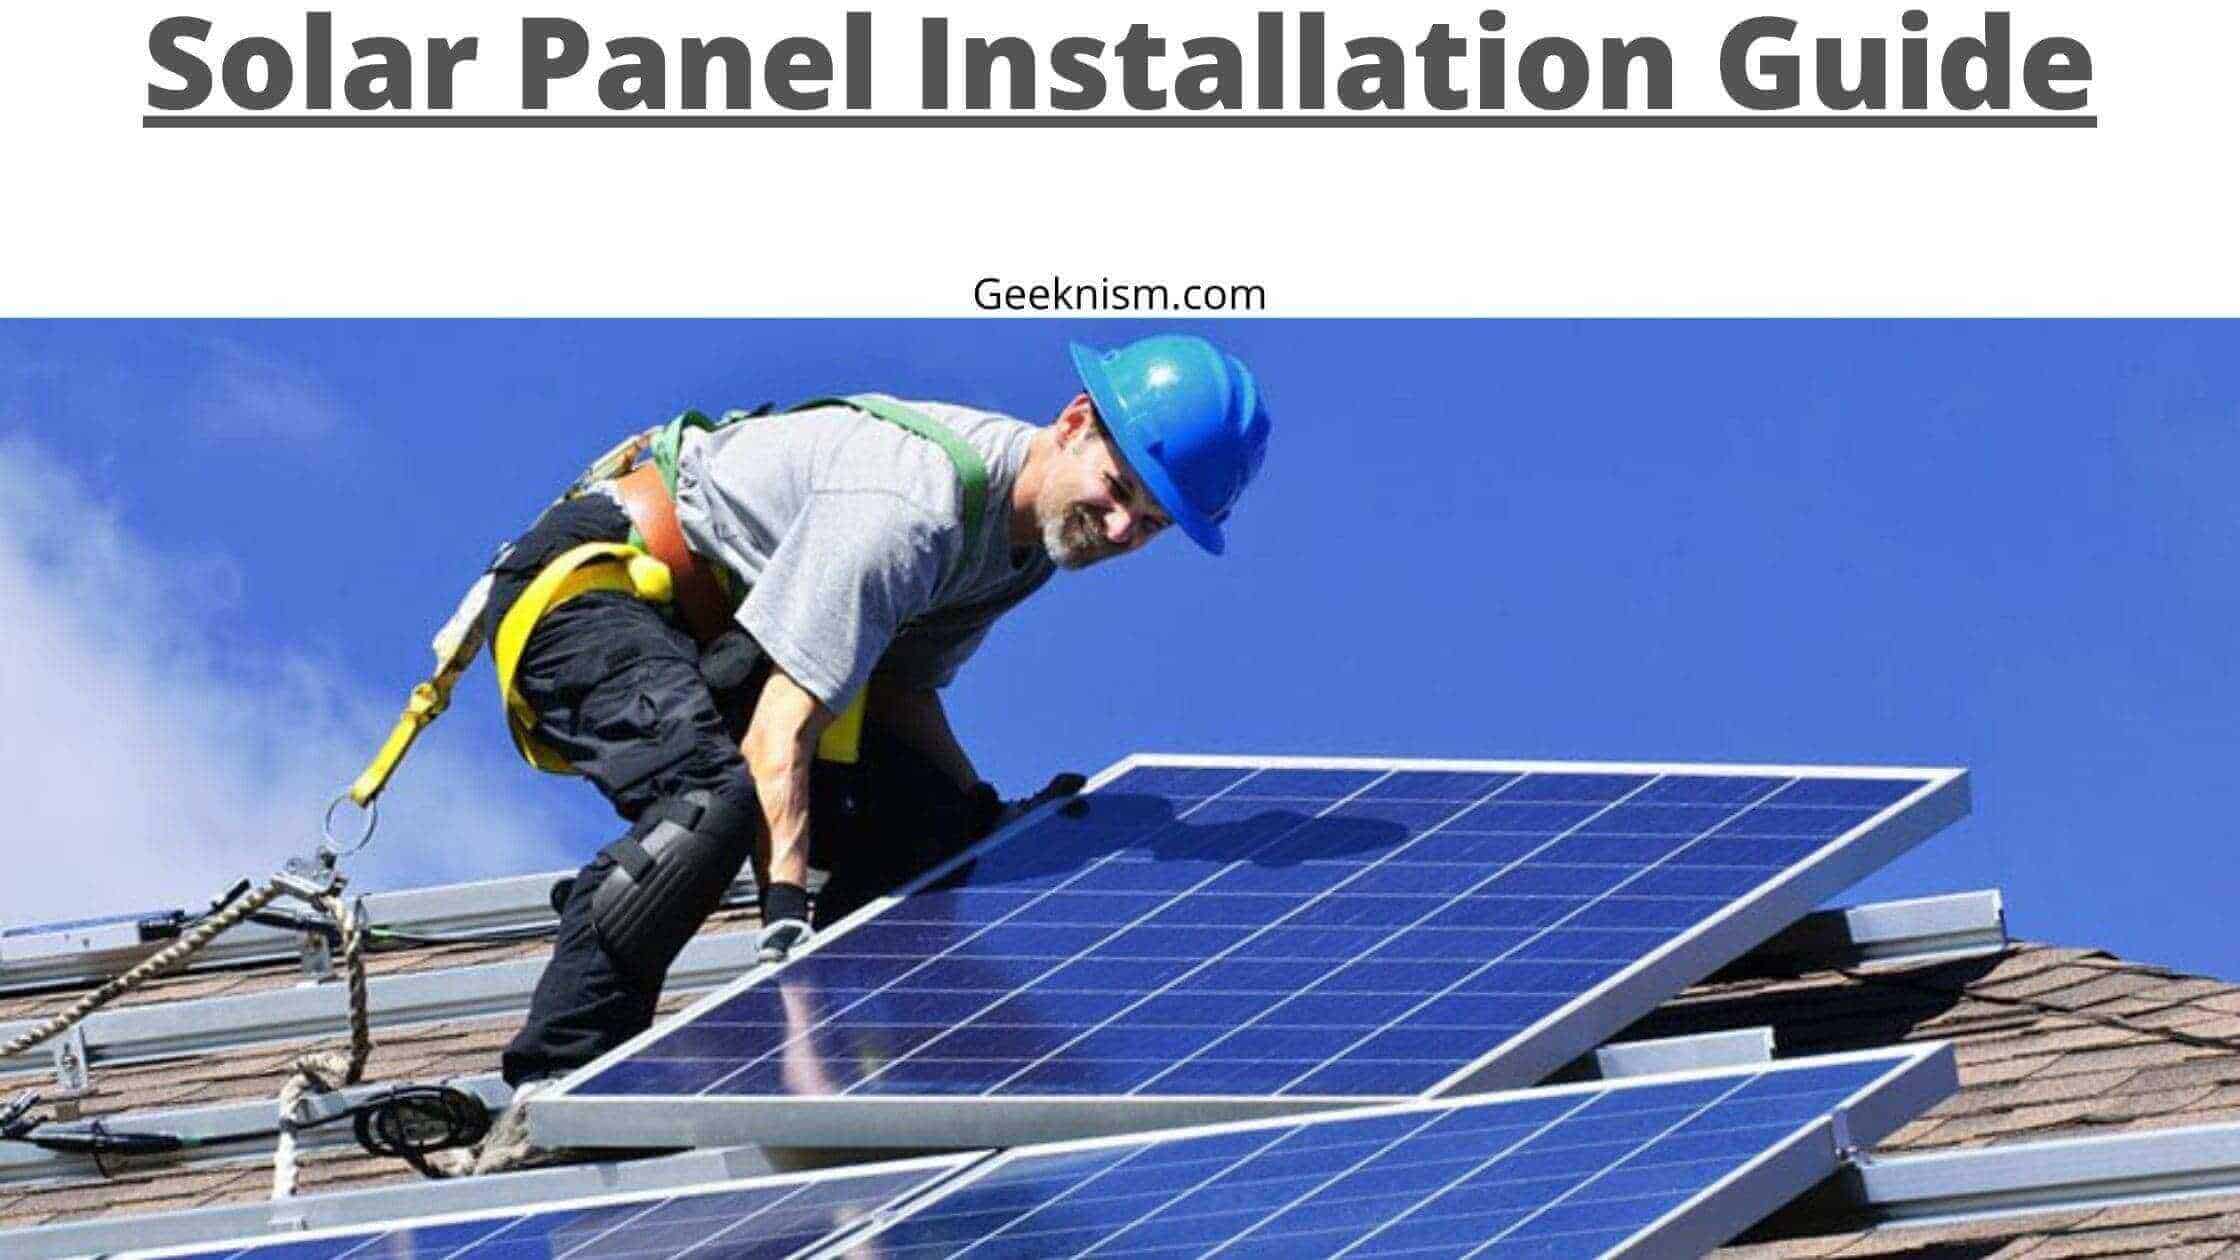 How to Install Solar Panel at Home